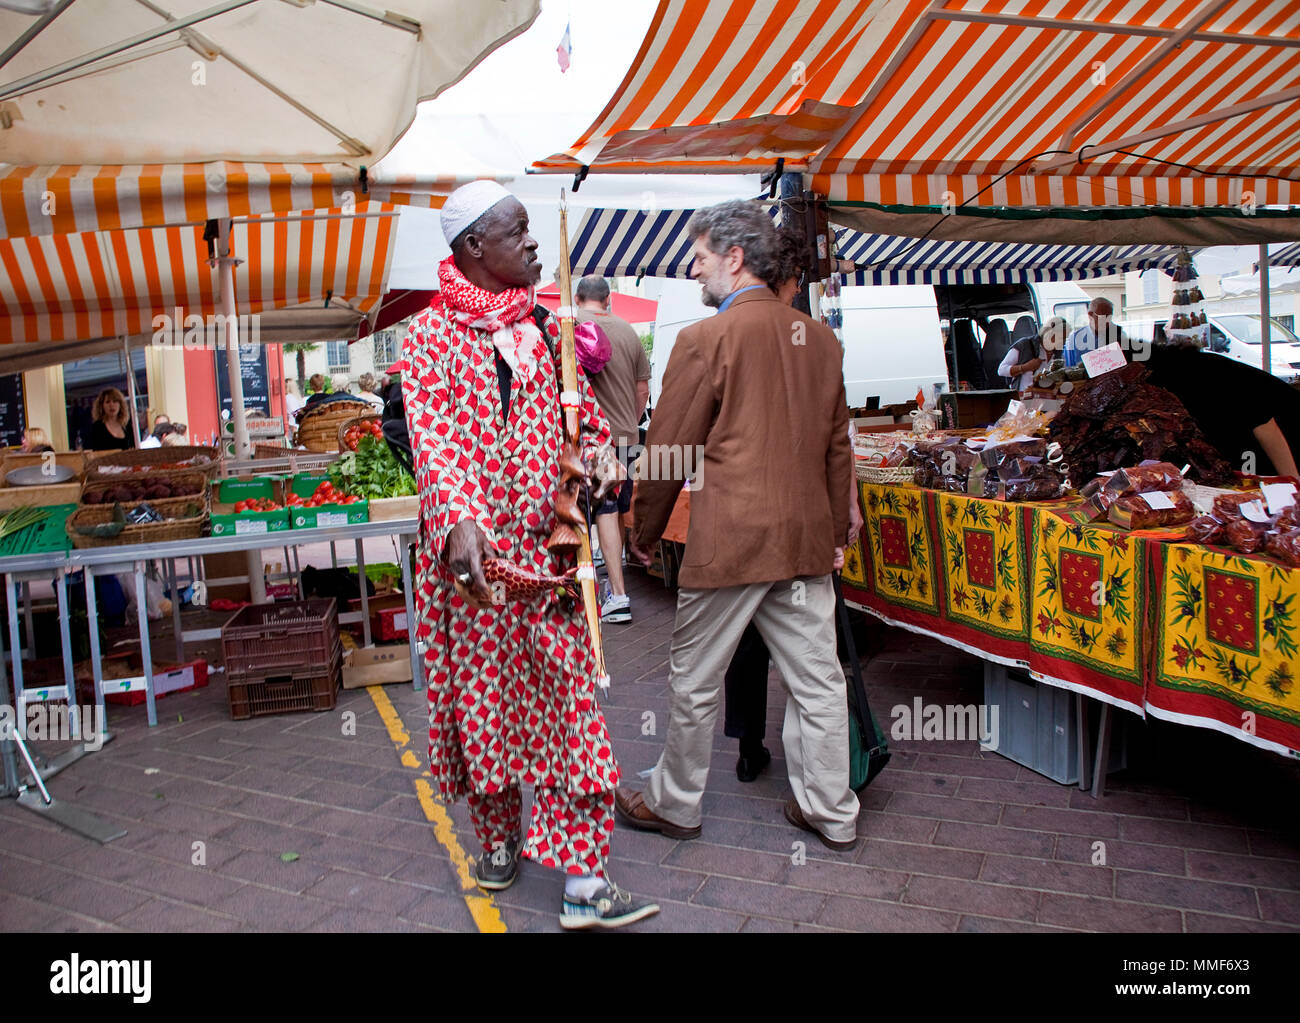 Dark-skinned souvenir seller at the market, place Cours Saleya, Nice, Côte d’Azur, Alpes-Maritimes, South France, France, Europe Stock Photo